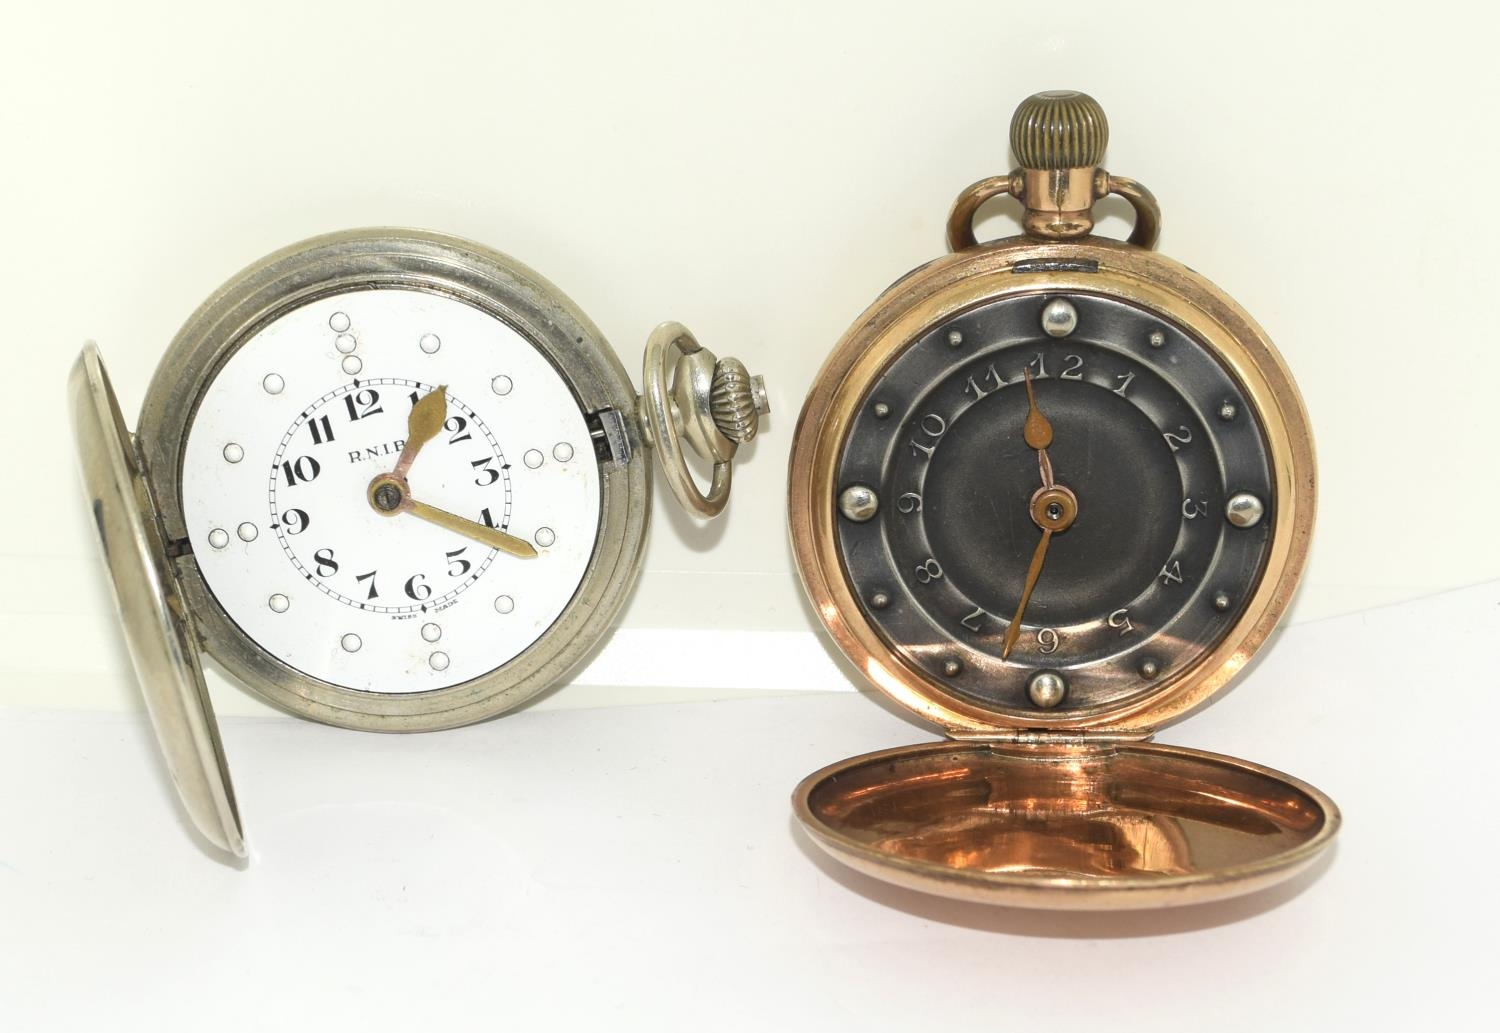 Two rare and collectable "Braile" pocket watches